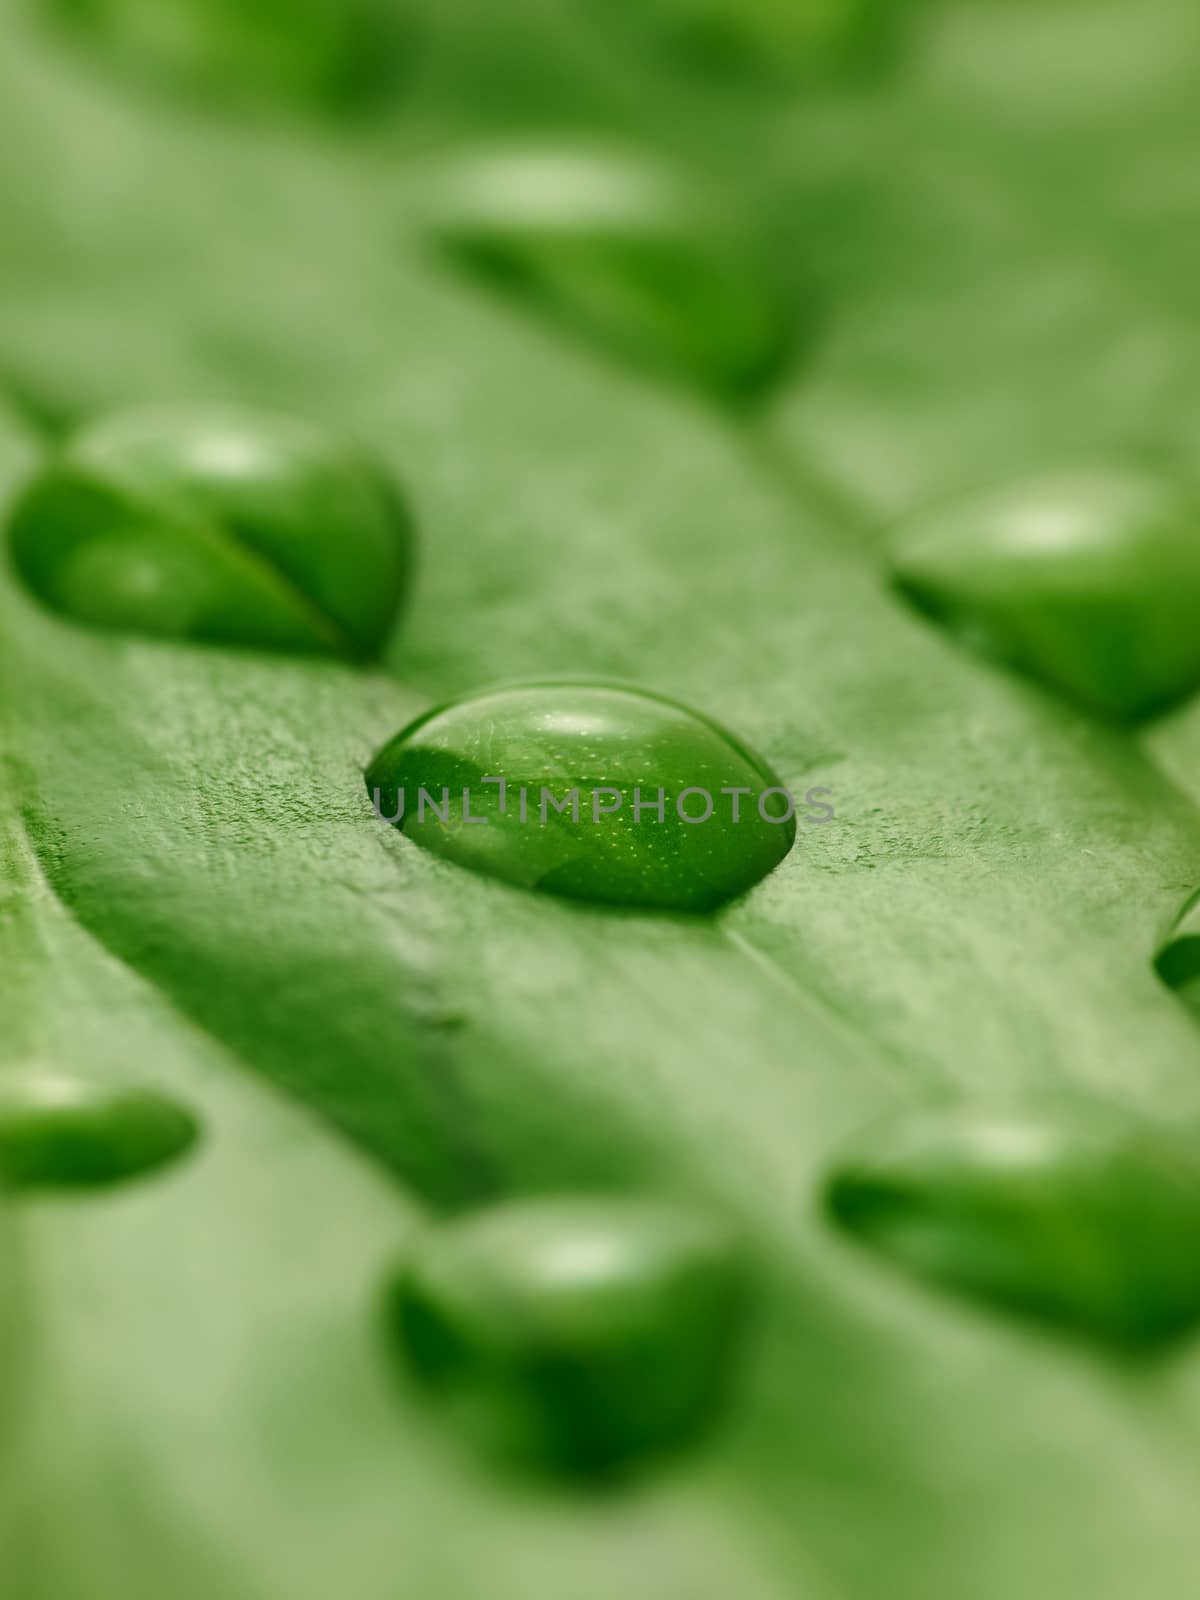 water drops on a green leaf by sette